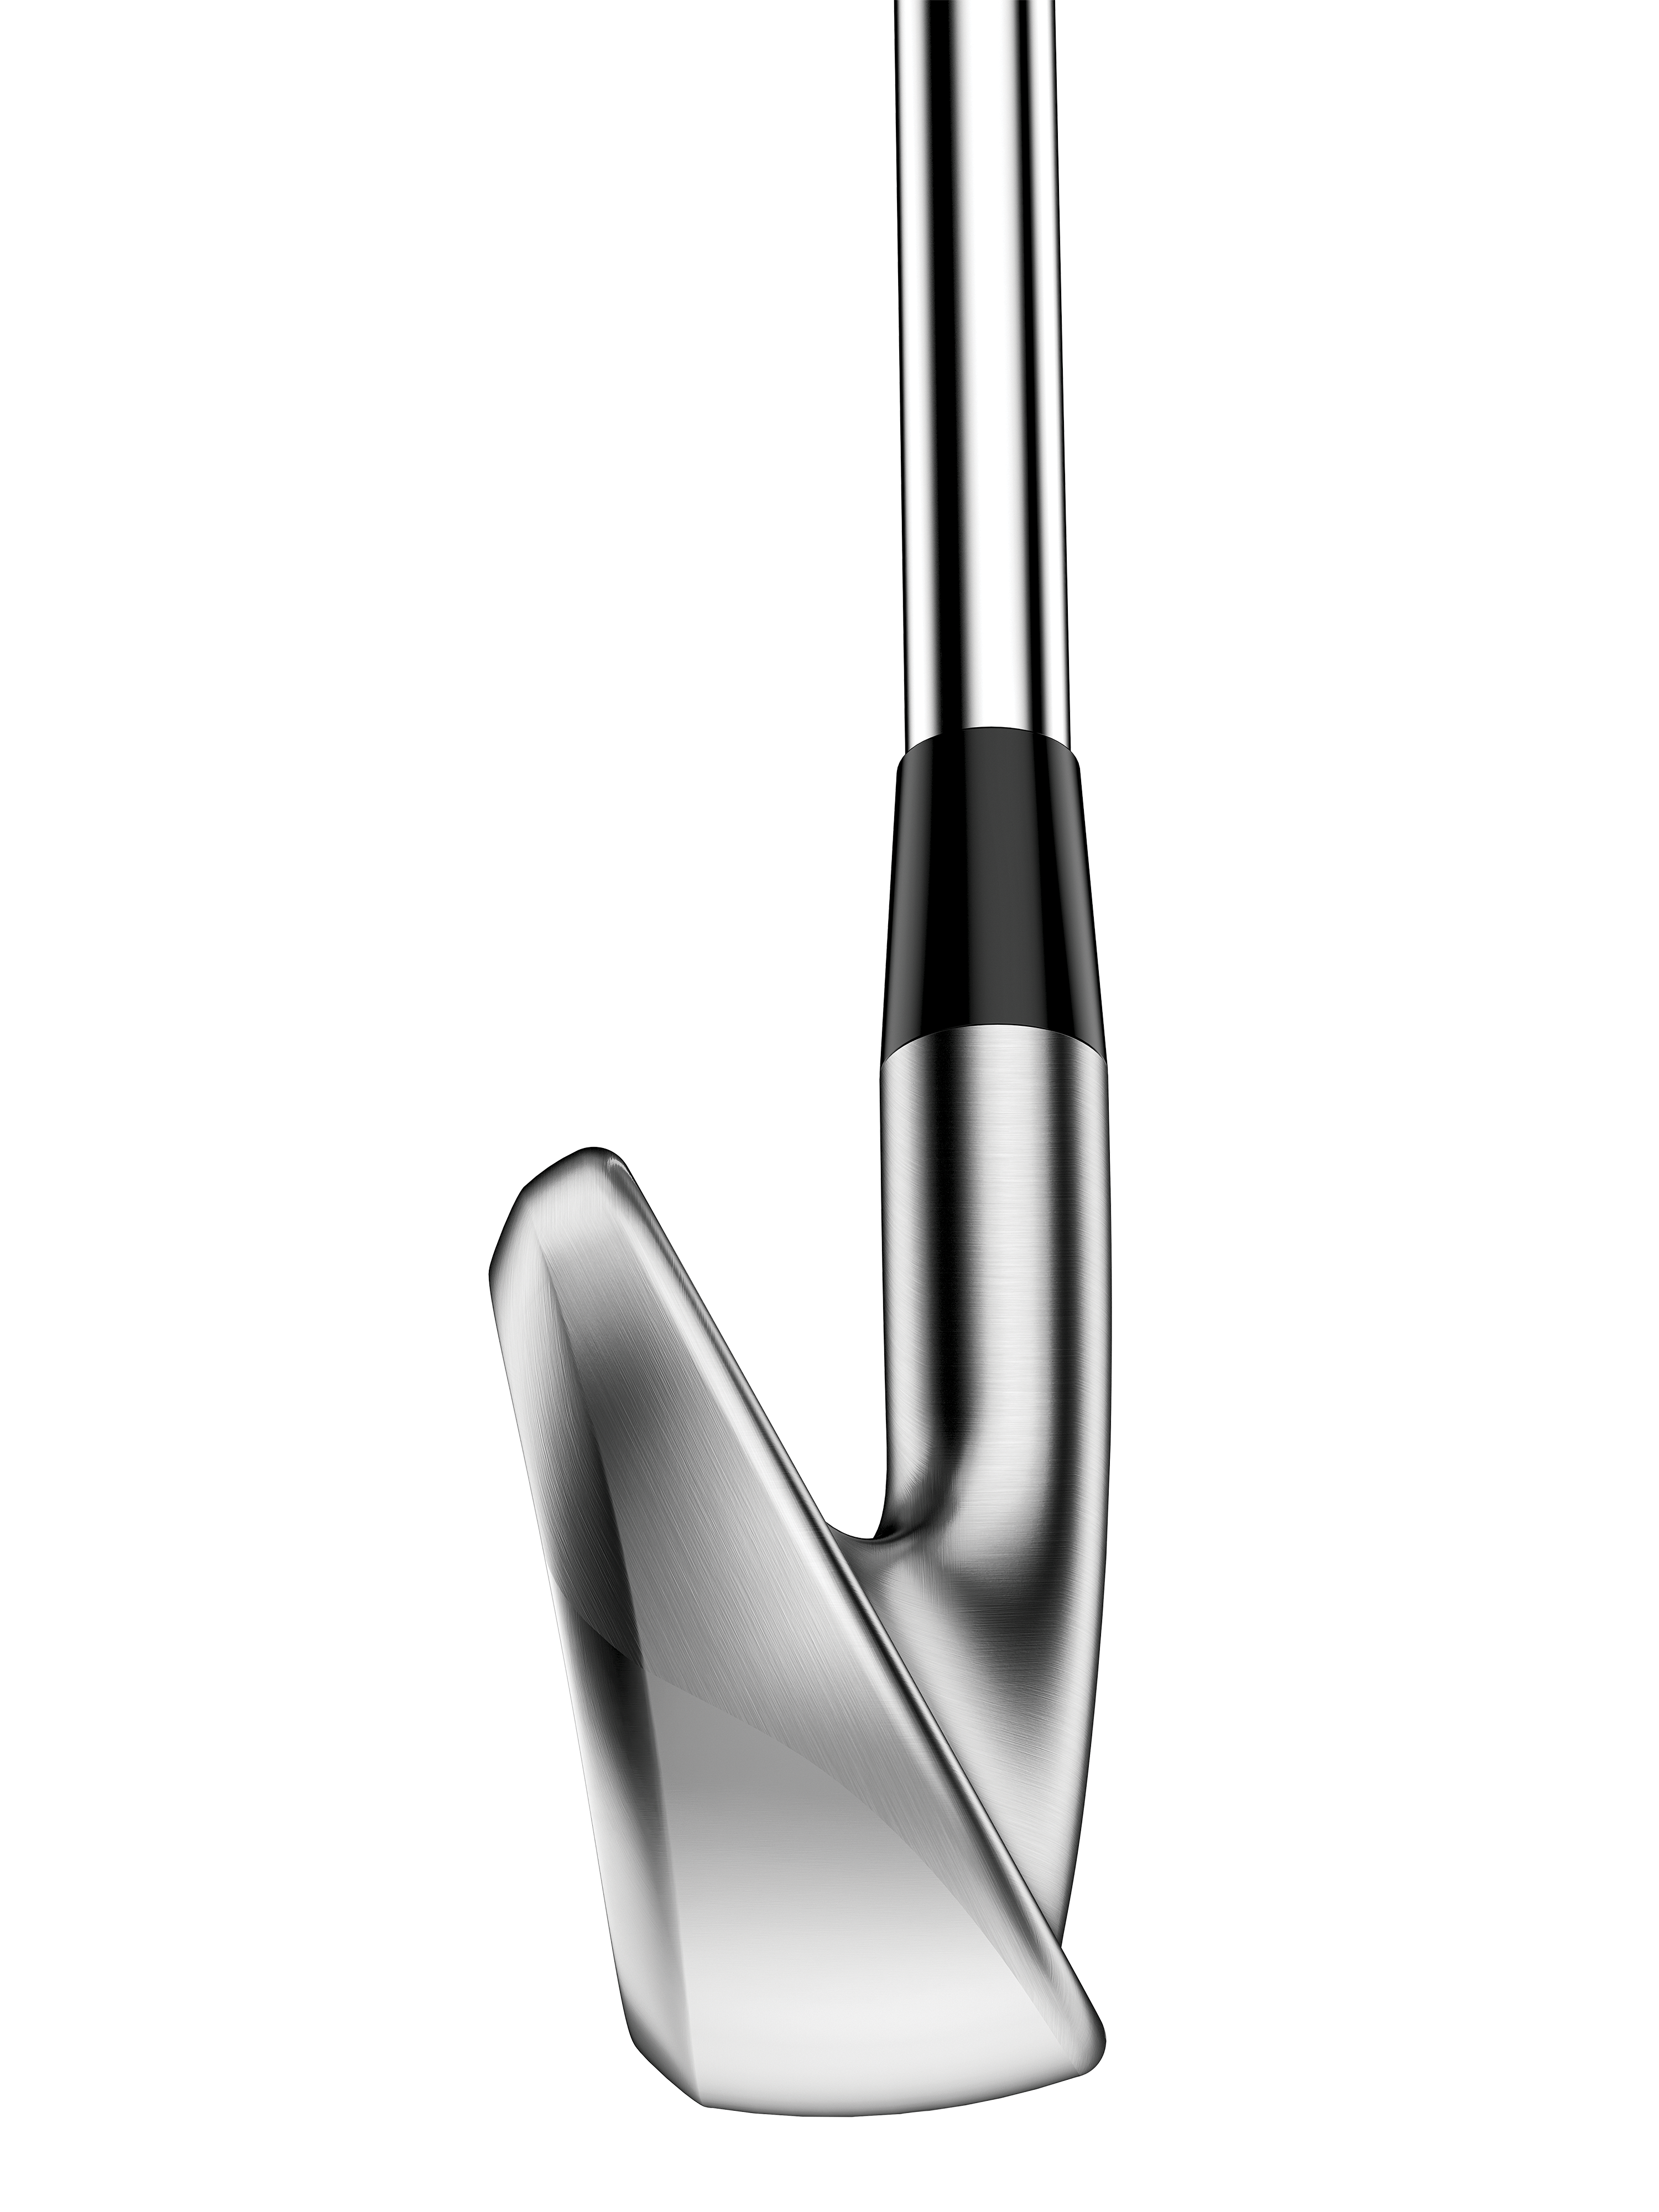 T300 Irons